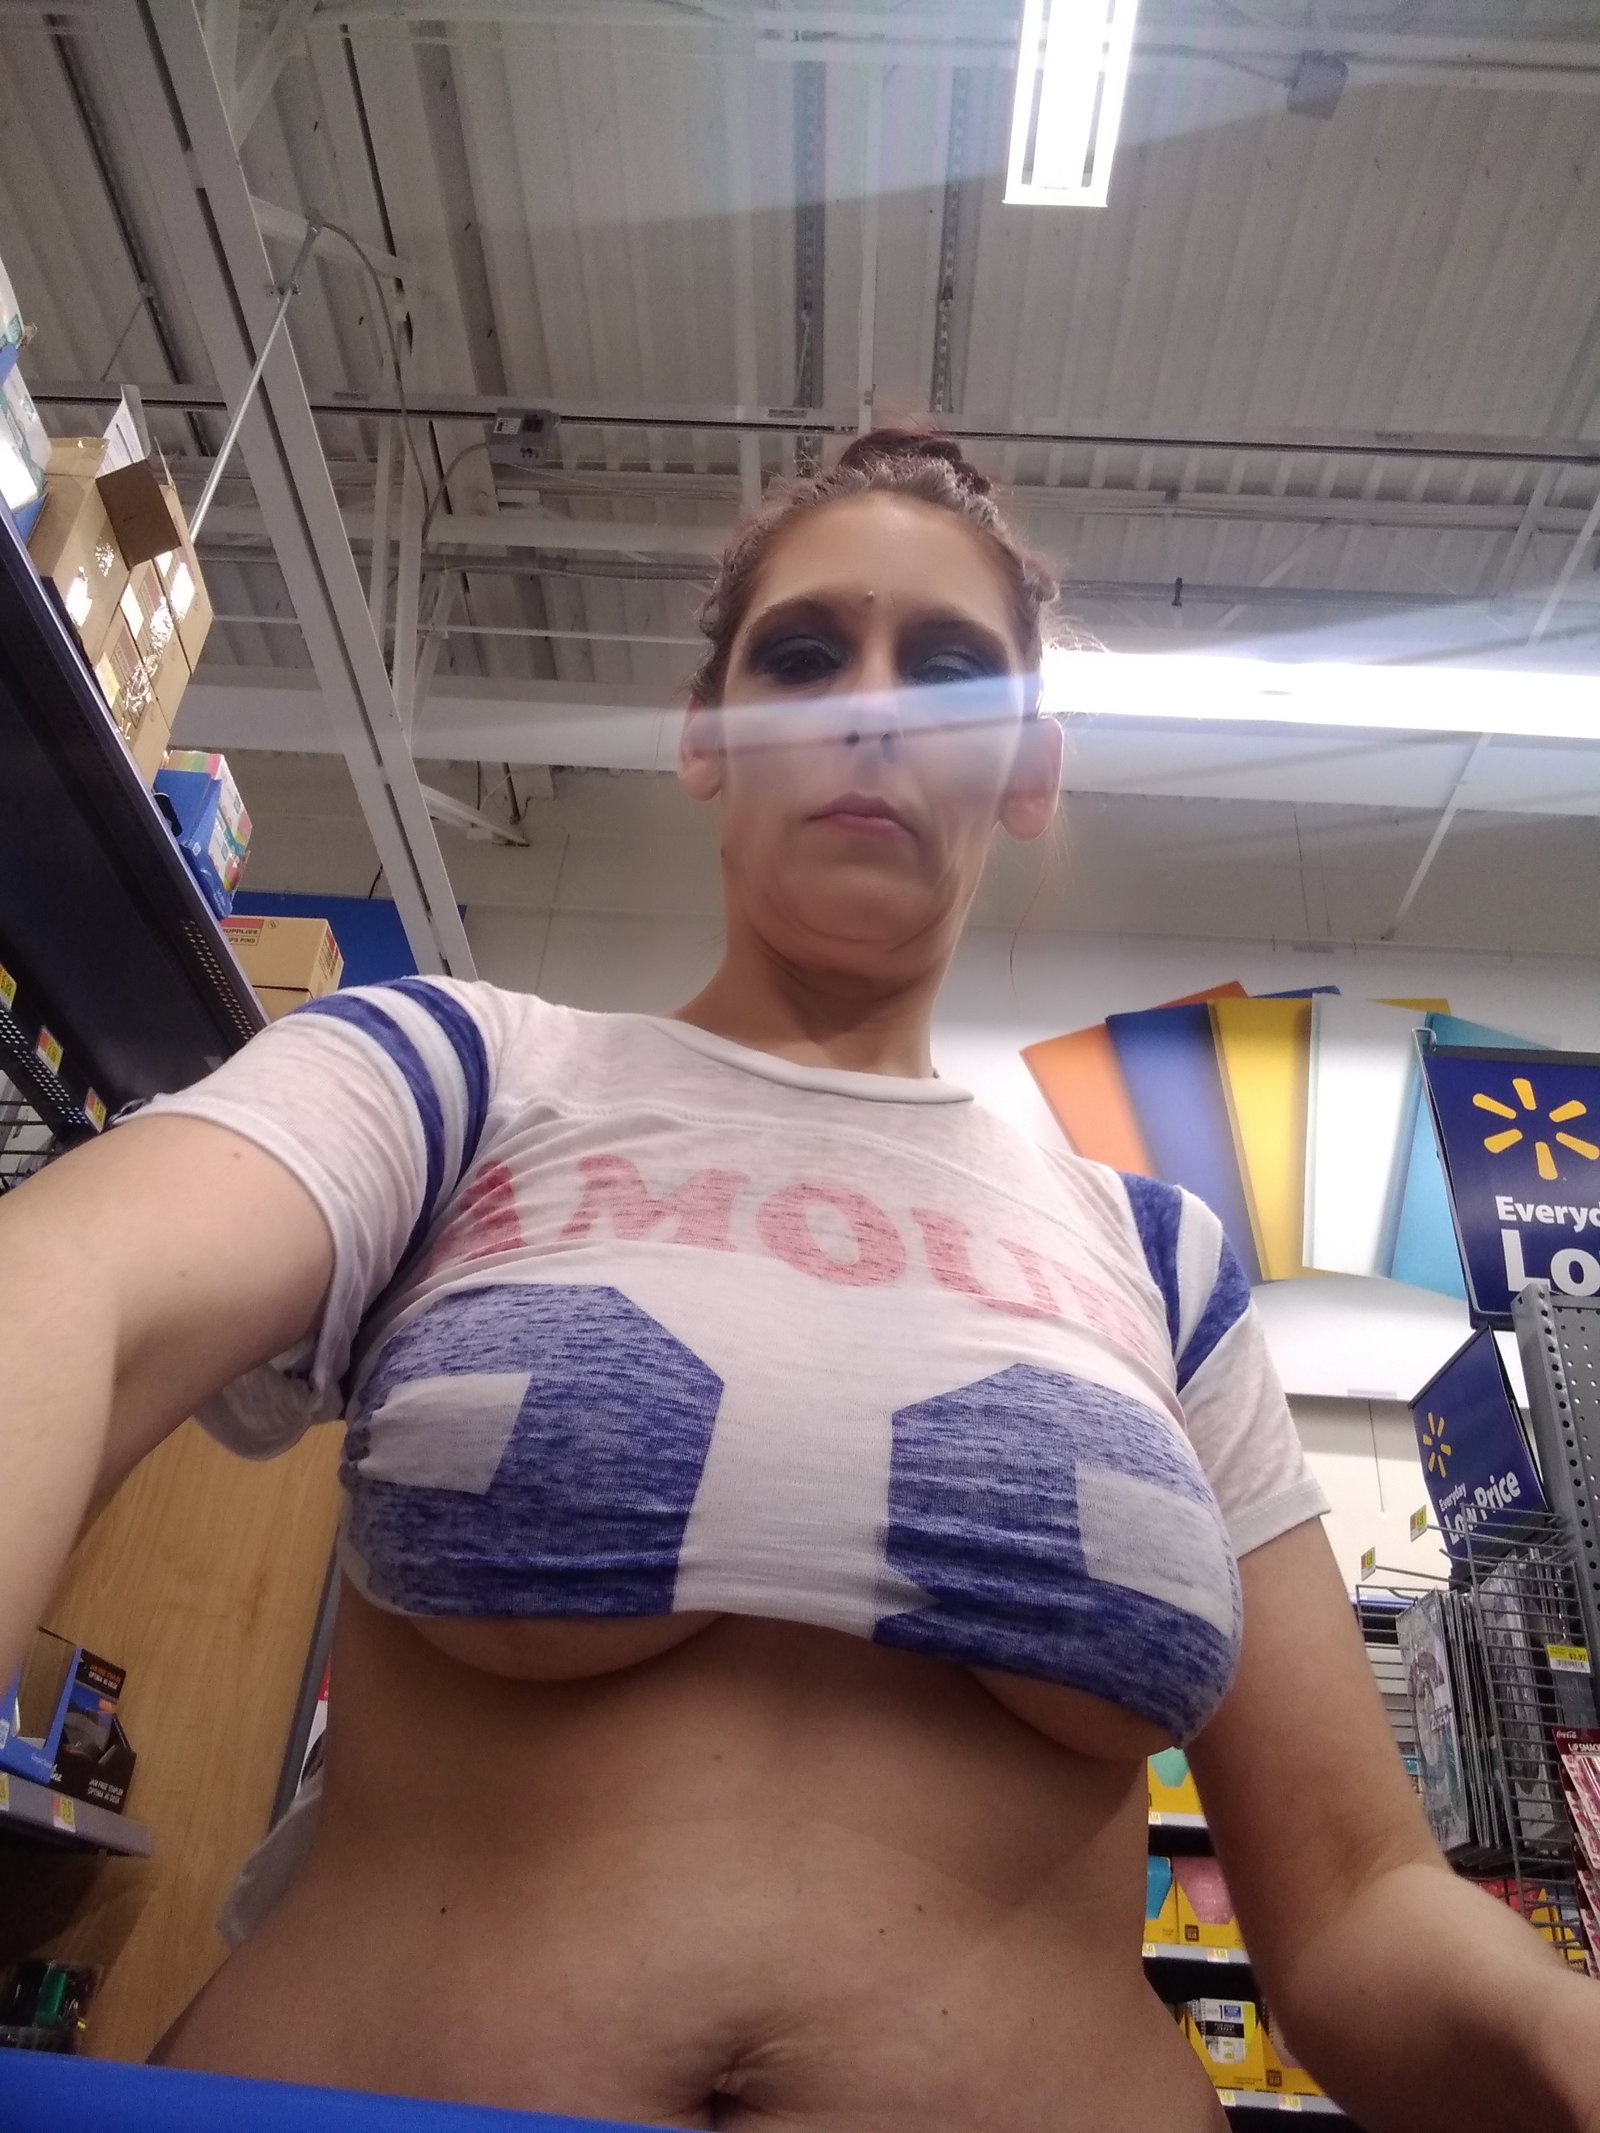 Photo by Kayge Kayne with the username @Kaygekayne, who is a star user,  December 19, 2019 at 5:20 PM. The post is about the topic Busty Chicks and the text says 'Filmed a 10min custom video in Walmart just like this... Walmart wasn't very happy especially when the girls went from bottom hanging to winking at self checkout 😂

I can't turn down a good dare; especially ones that I get paid for'